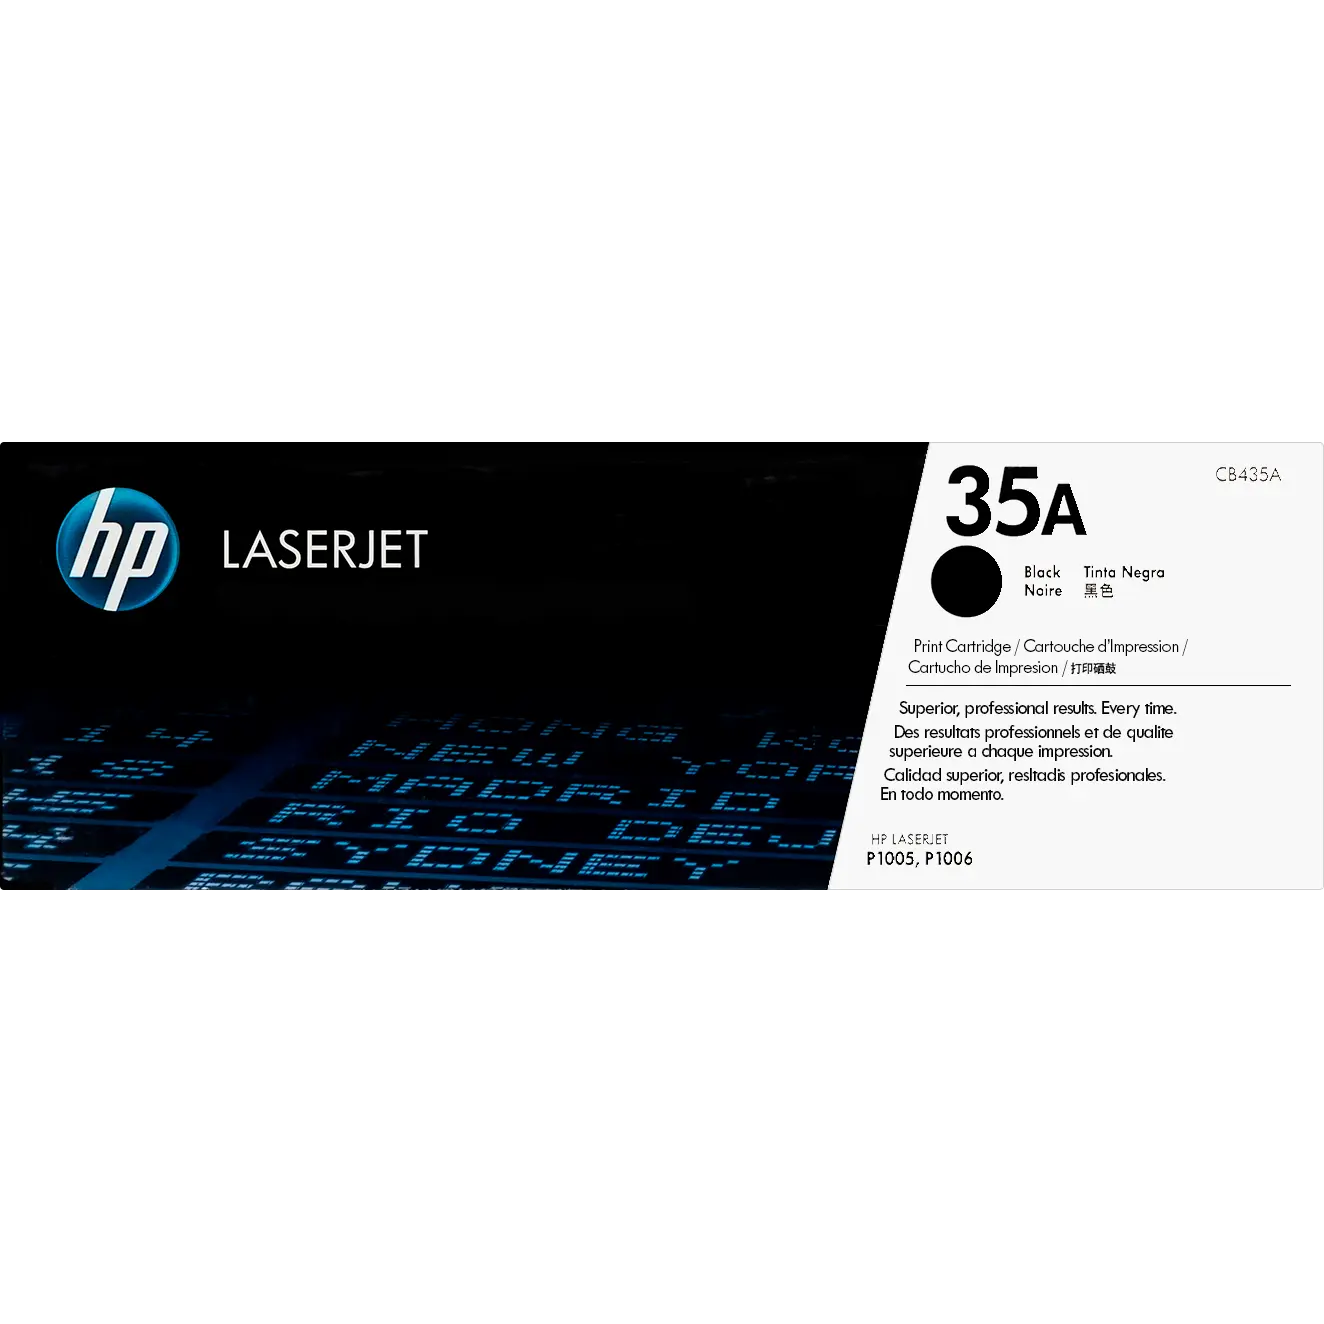 Affordable hp 35a toner: quality printing solution